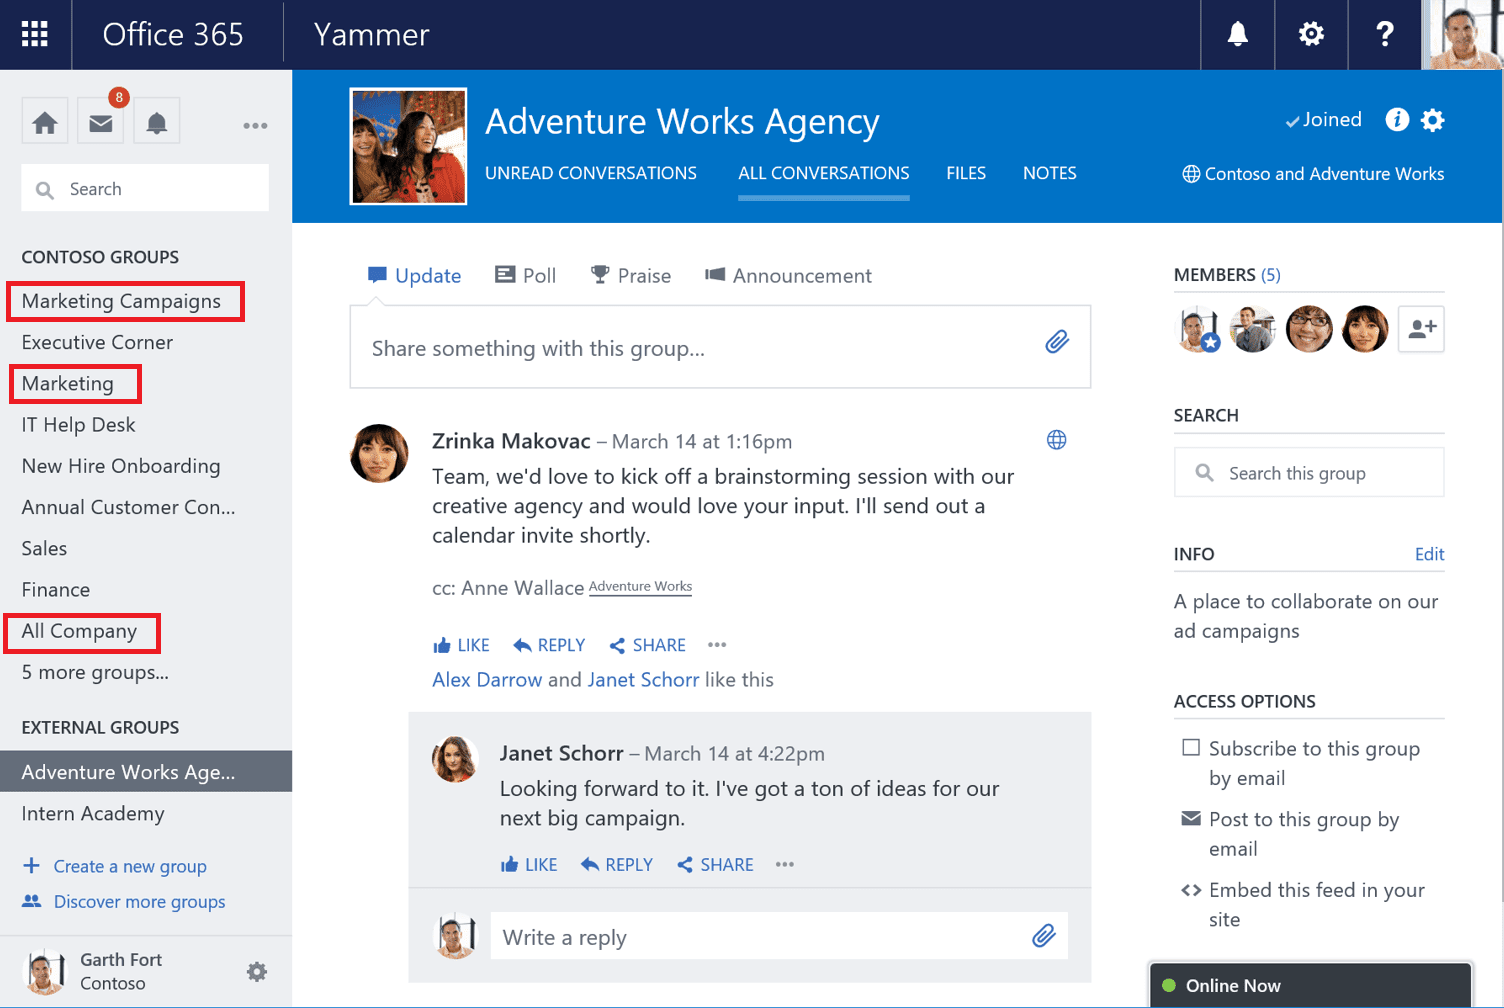 Example of how to use Yammer to stay connected